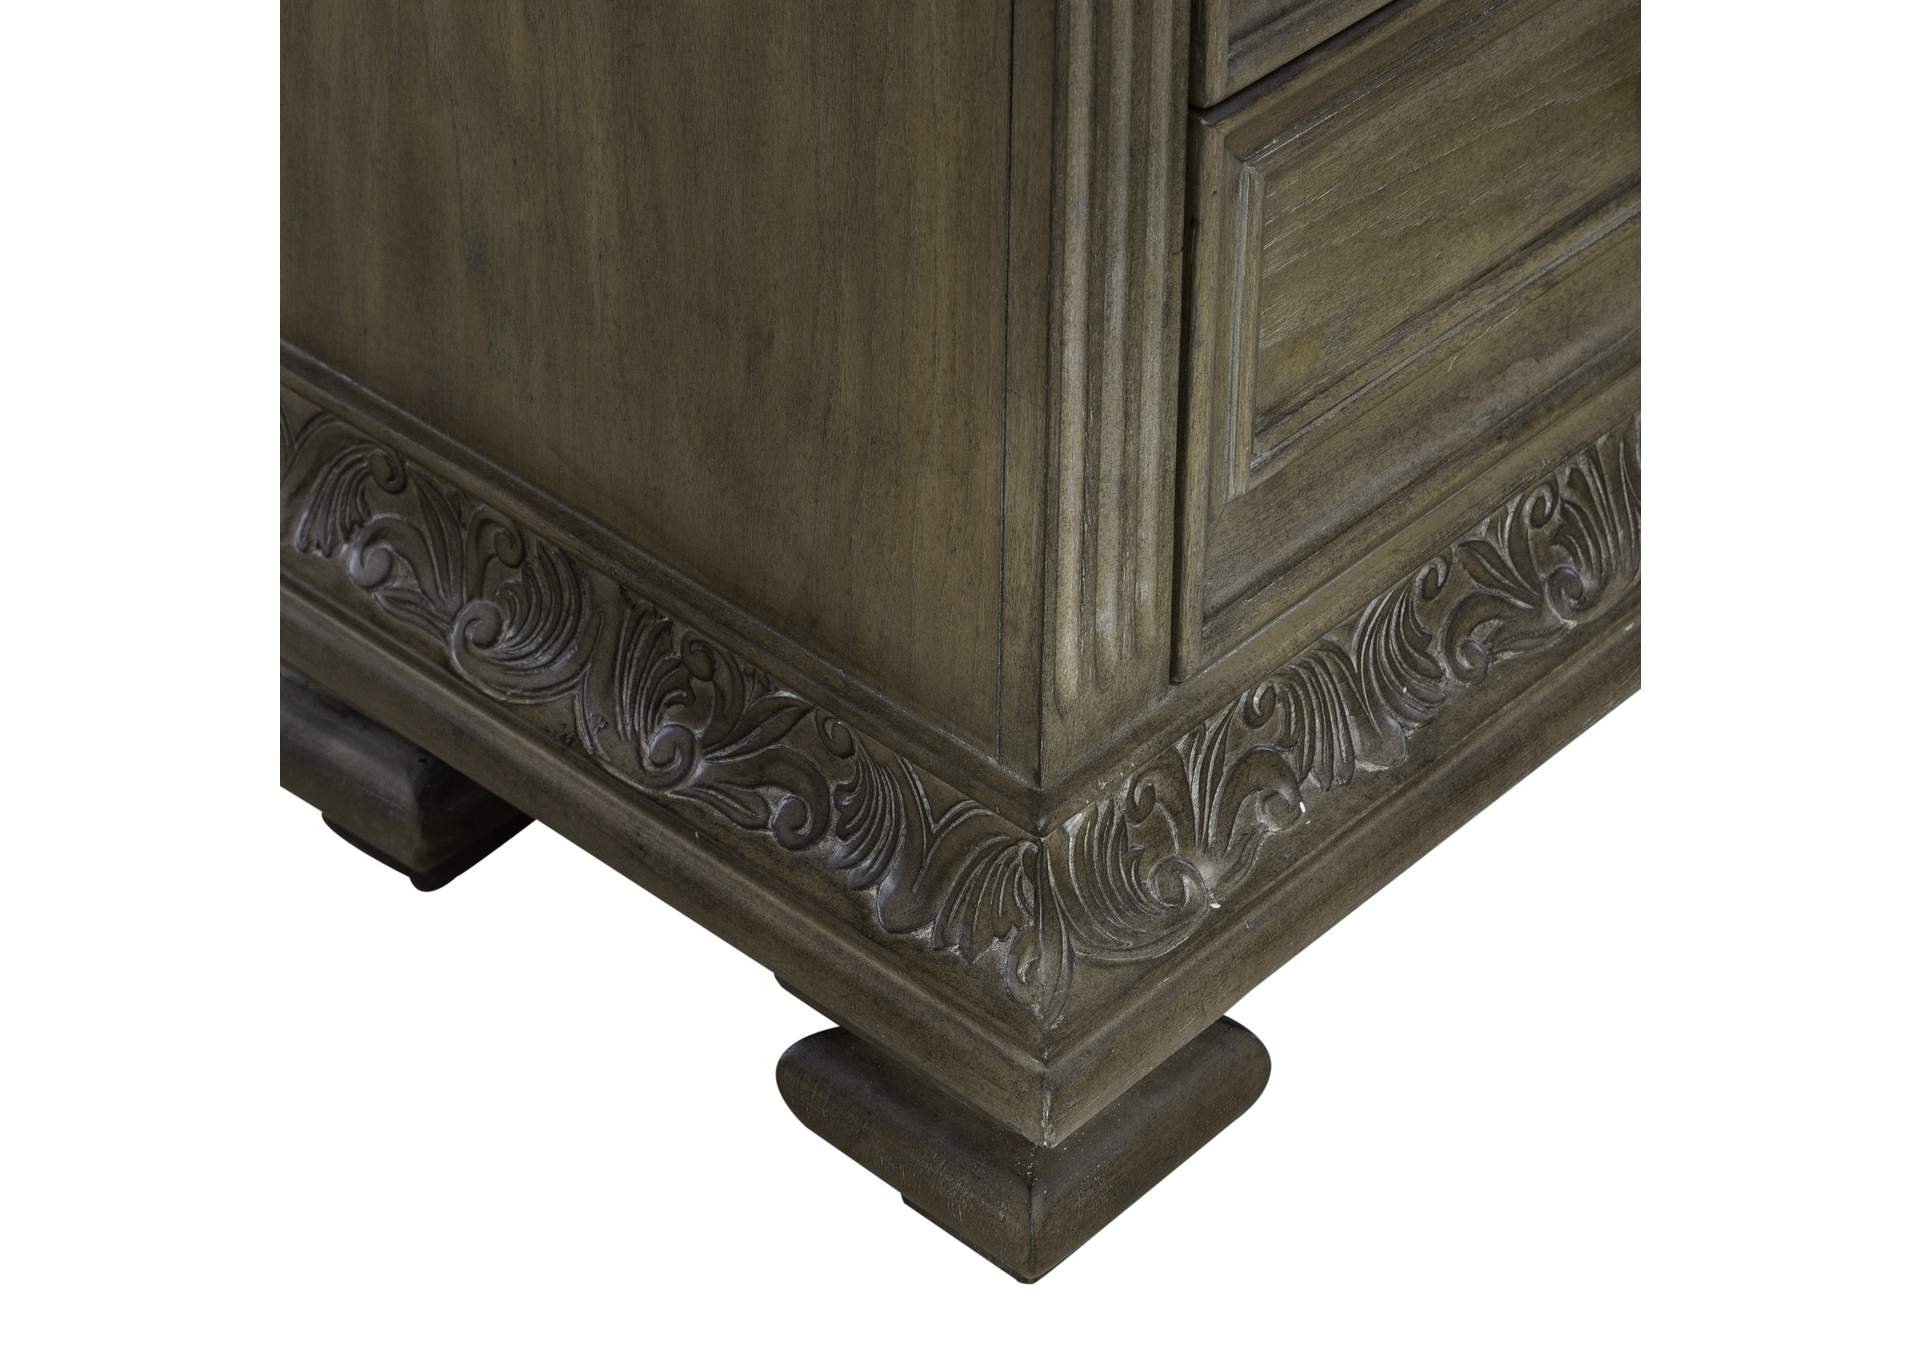 Carlisle Court Bedside Chest with Charging Station,Liberty